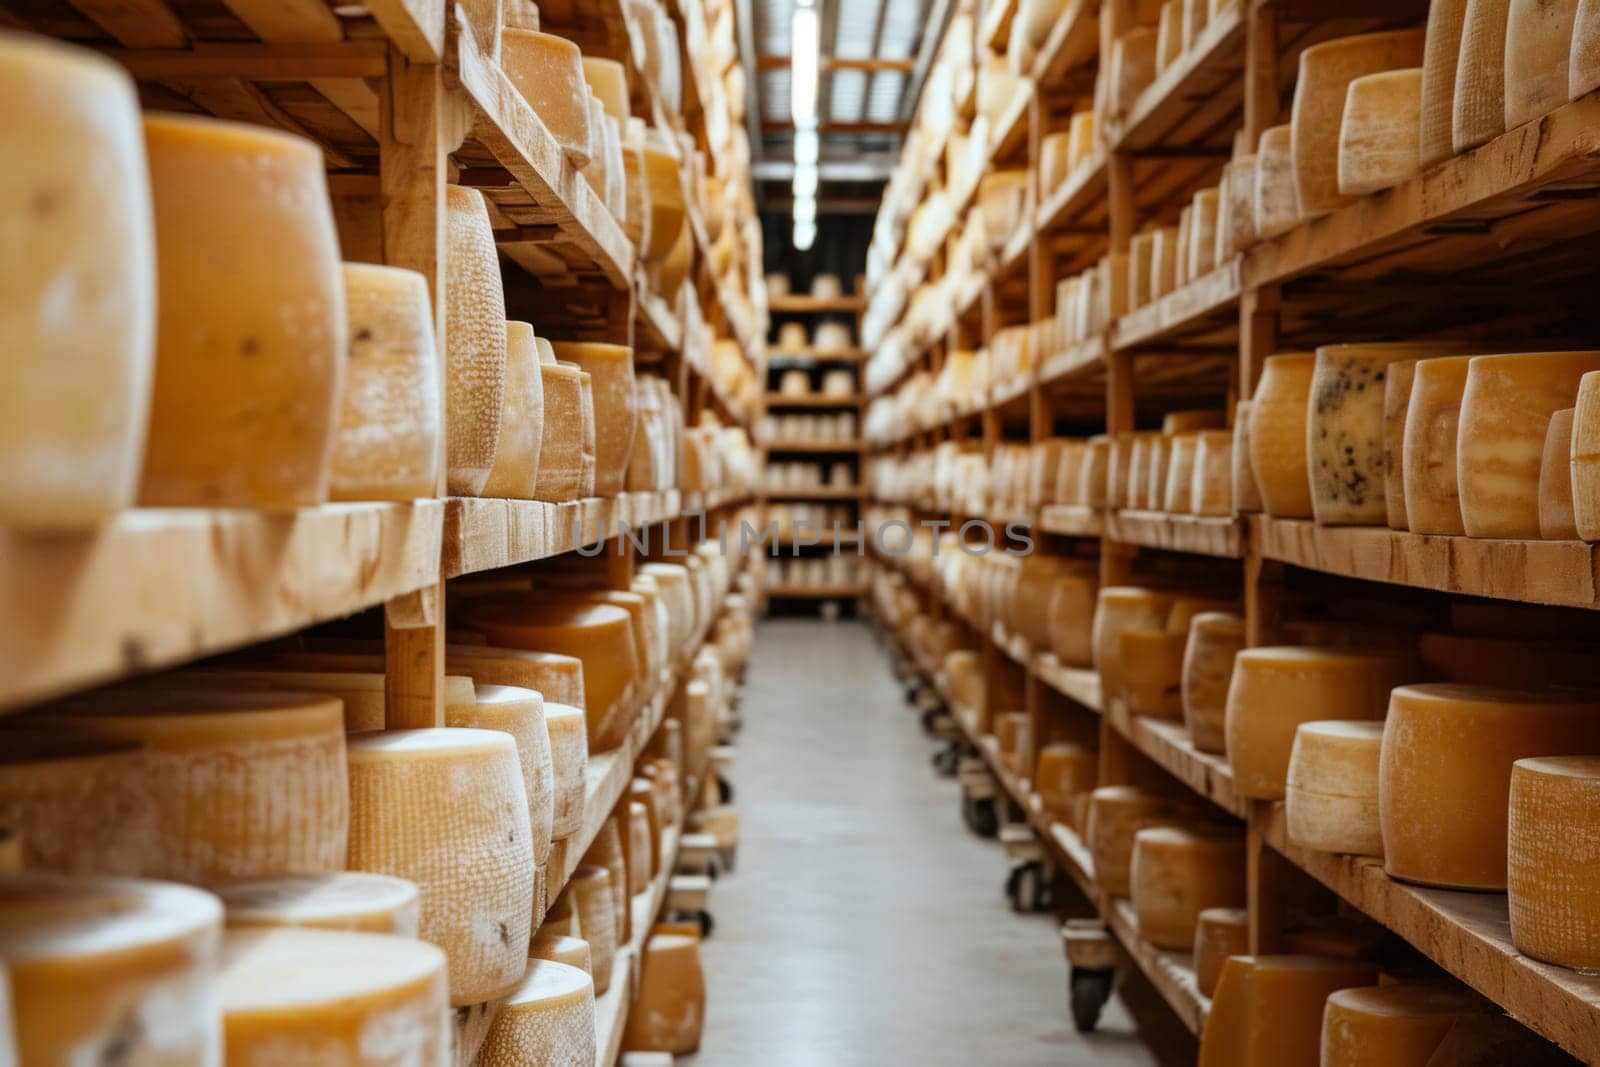 Parmesan cheese aging on shelves in factory warehouse by rusak